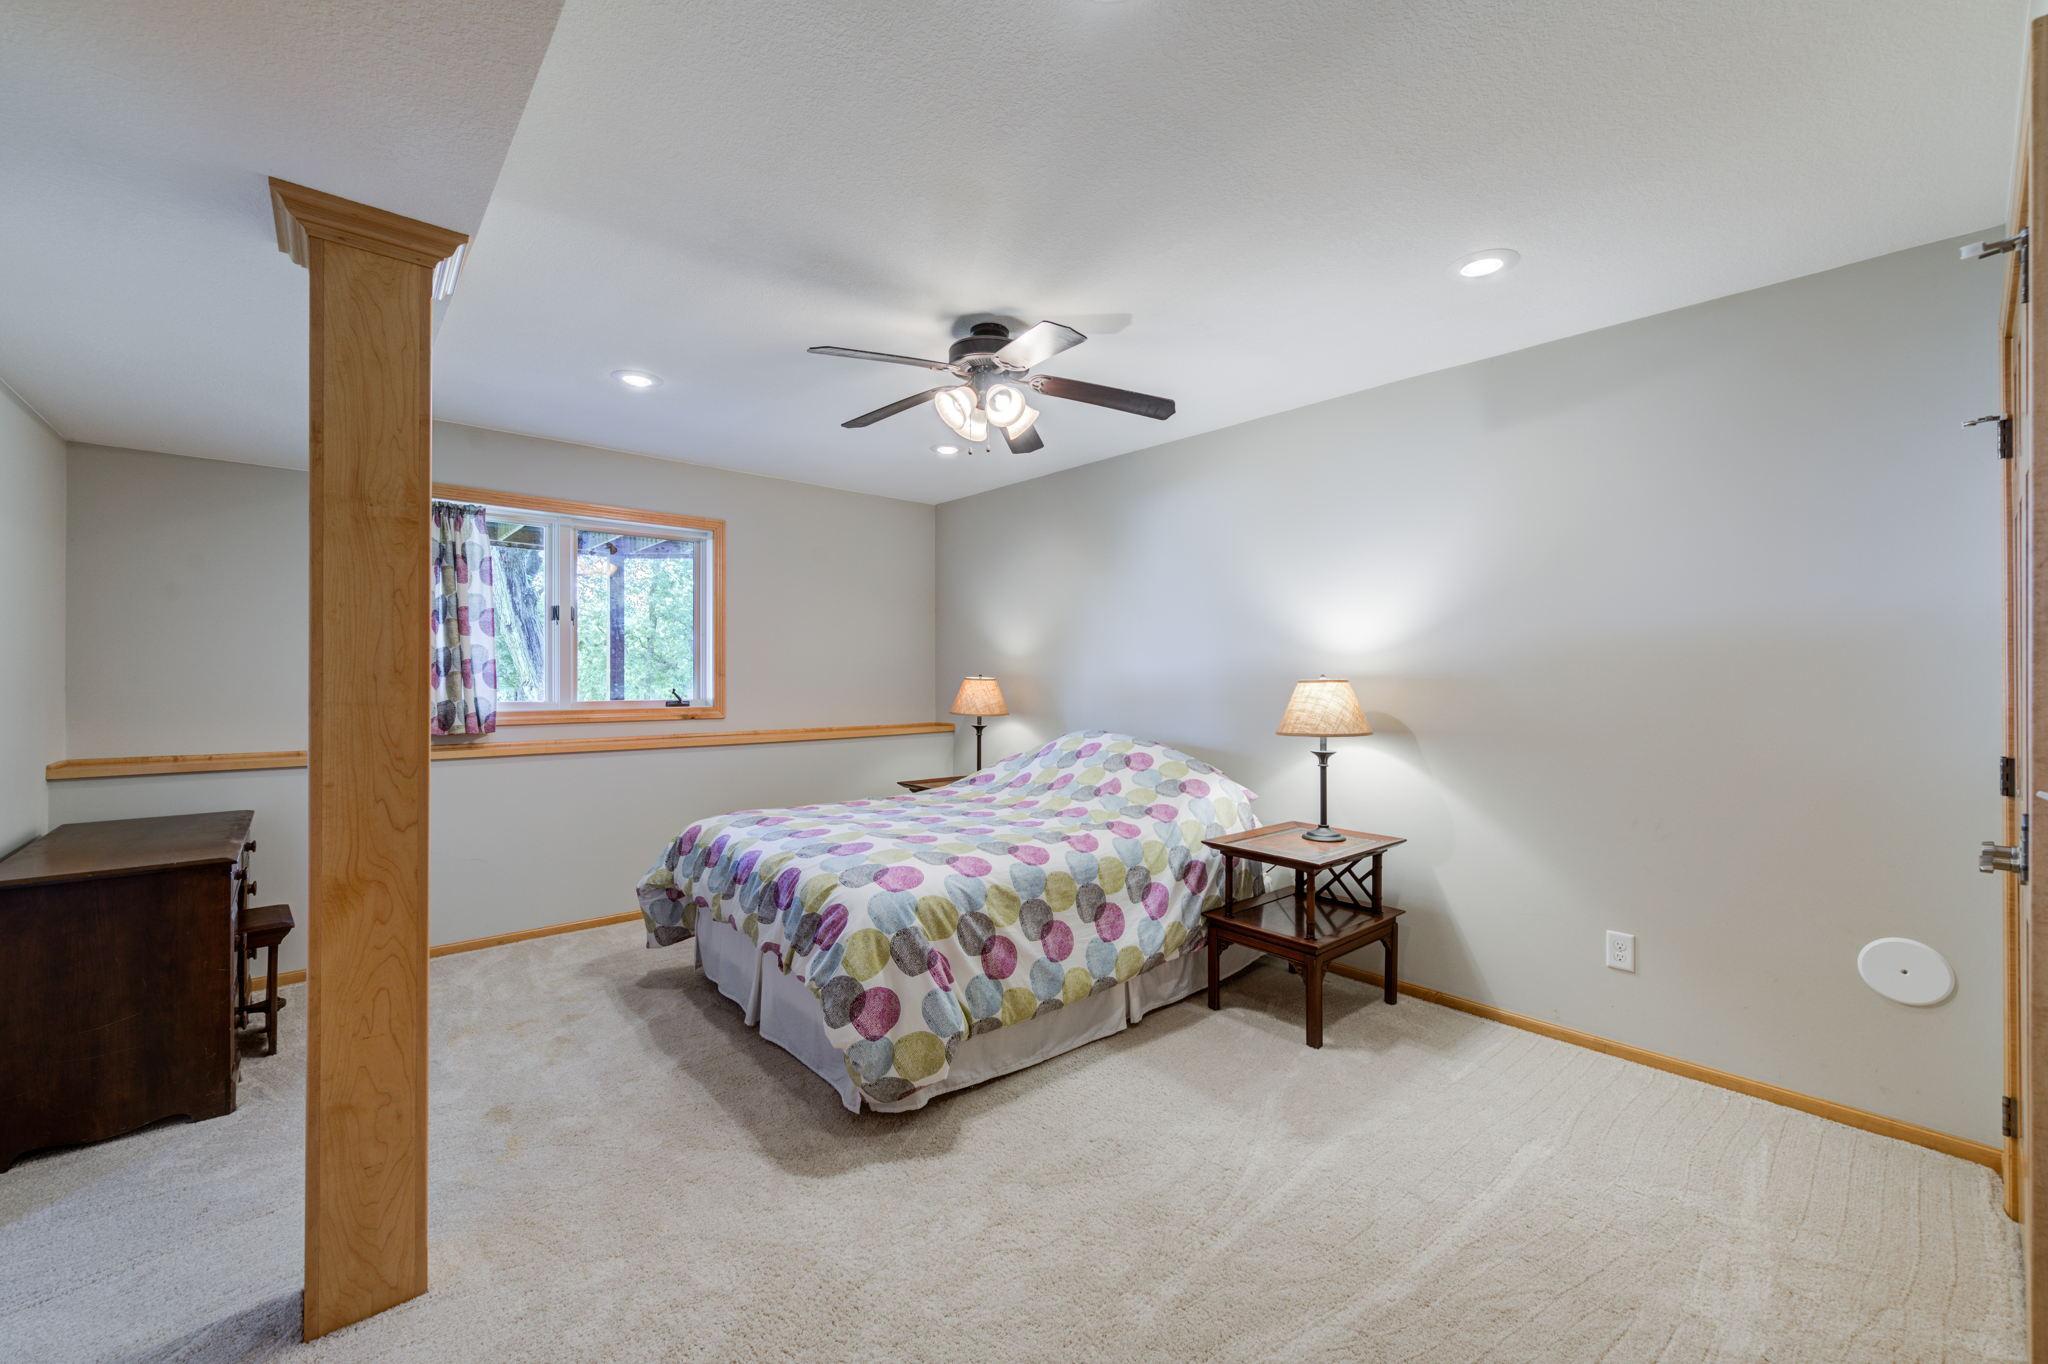 The lower level bedroom is very spacious at 17x14 with a large closet featuring french doors with plenty of storage space!